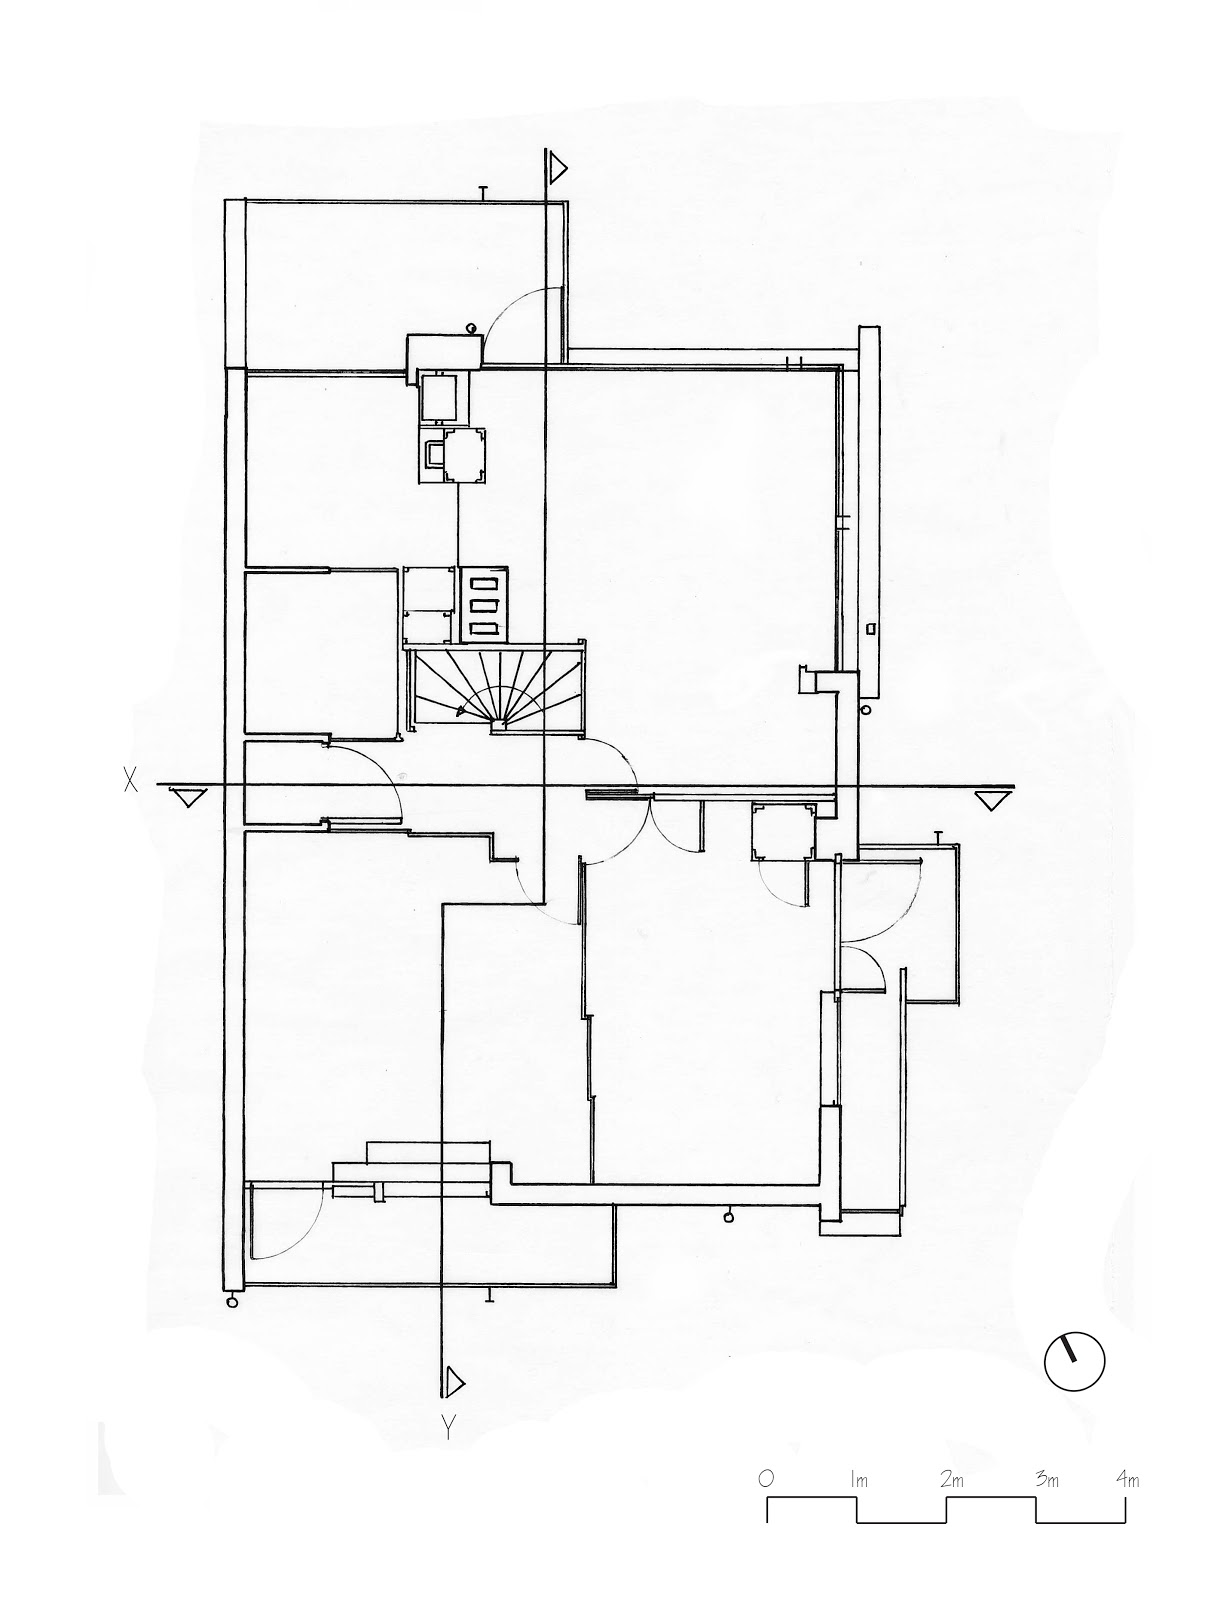 THE RIETVELD SCHRODER HOUSE HAND DRAWINGS